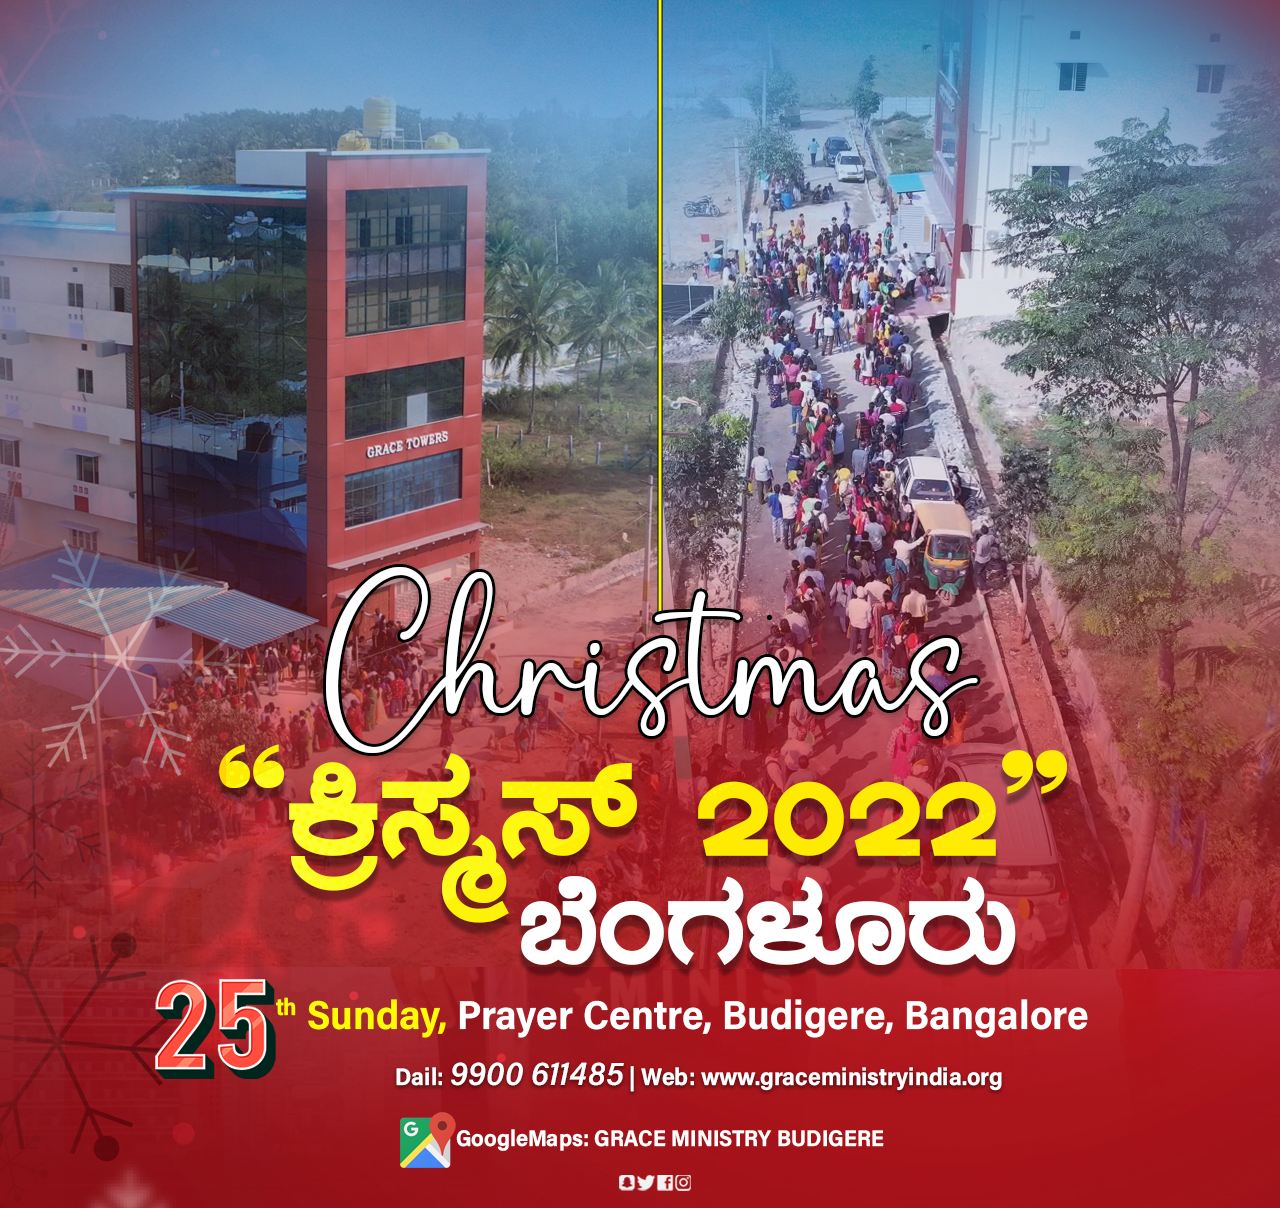 Join the Grace Ministry Grand Christmas Celebration 2022 held at Prayer Centre, Budigere in Bangalore on 25th December from 10:00 AM to 3:30PM. Experience the life-changing Kannada Christmas sermon/message from Bro Andrew Richard.